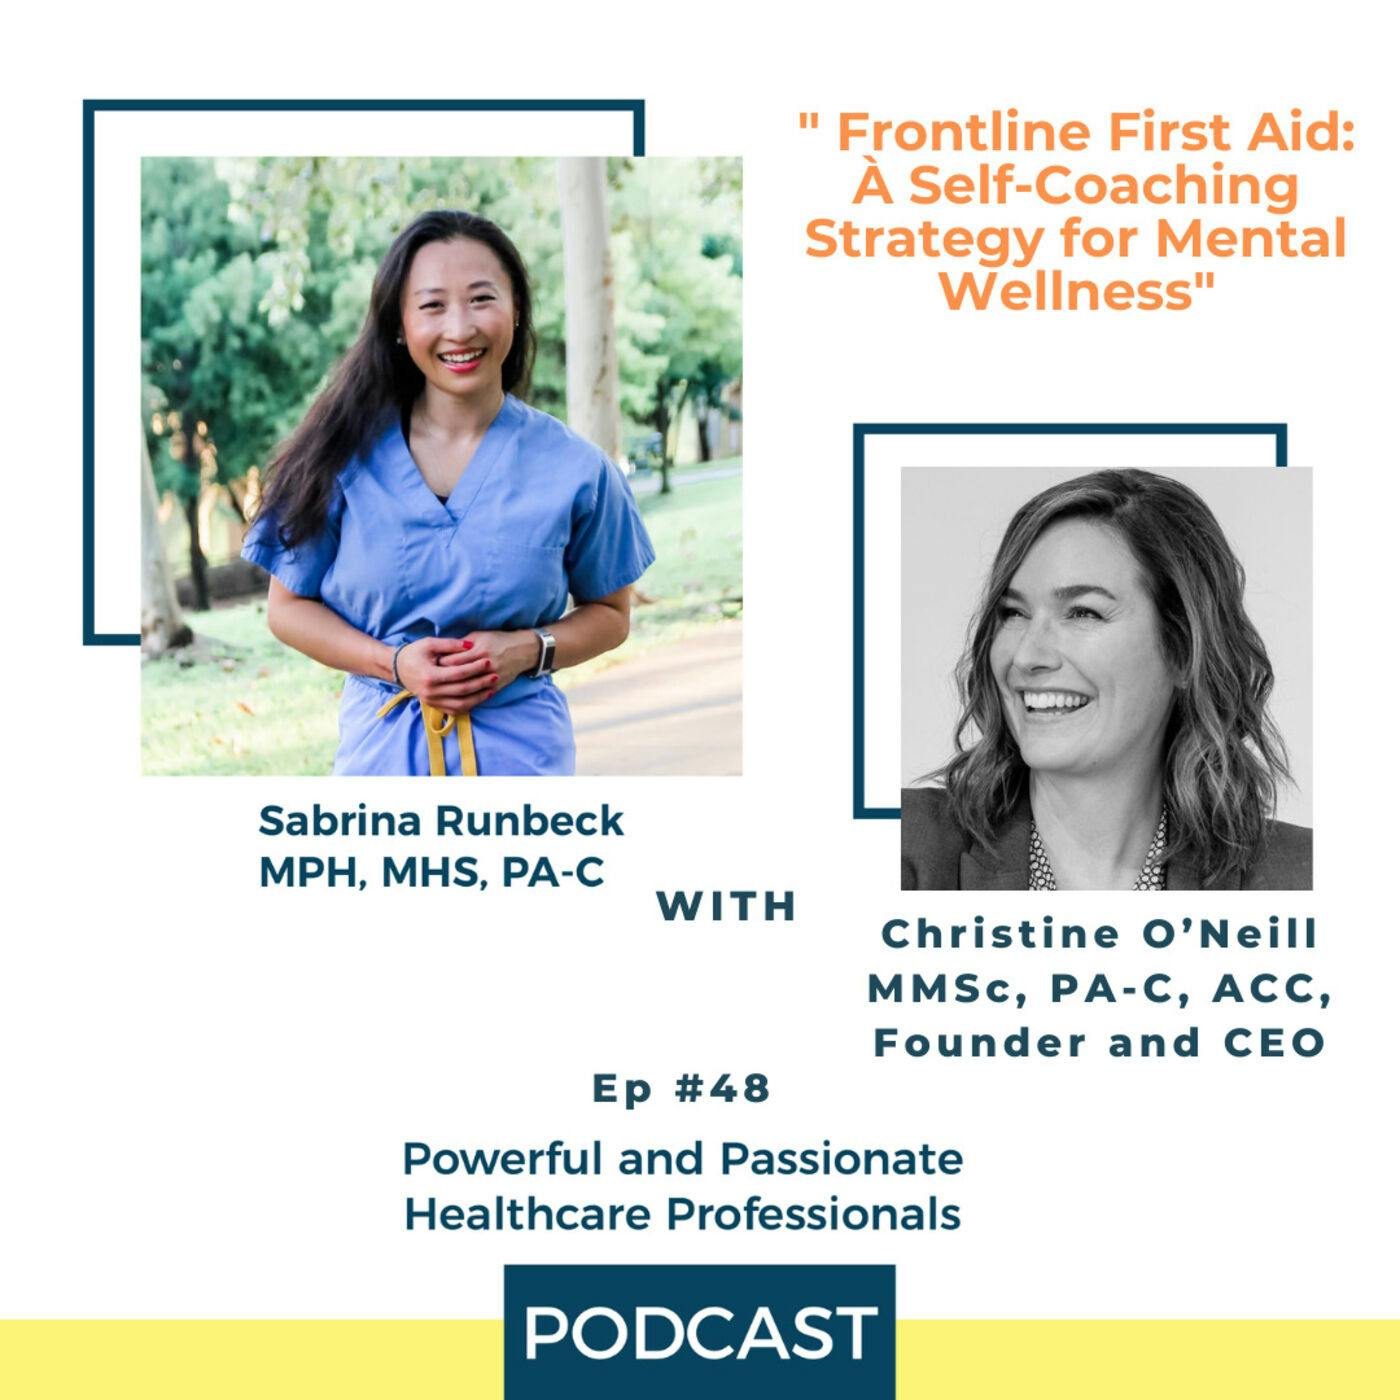 Ep 48 – Frontline First Aid: A Self-Coaching Strategy for Mental Wellness with Christine O’Neill